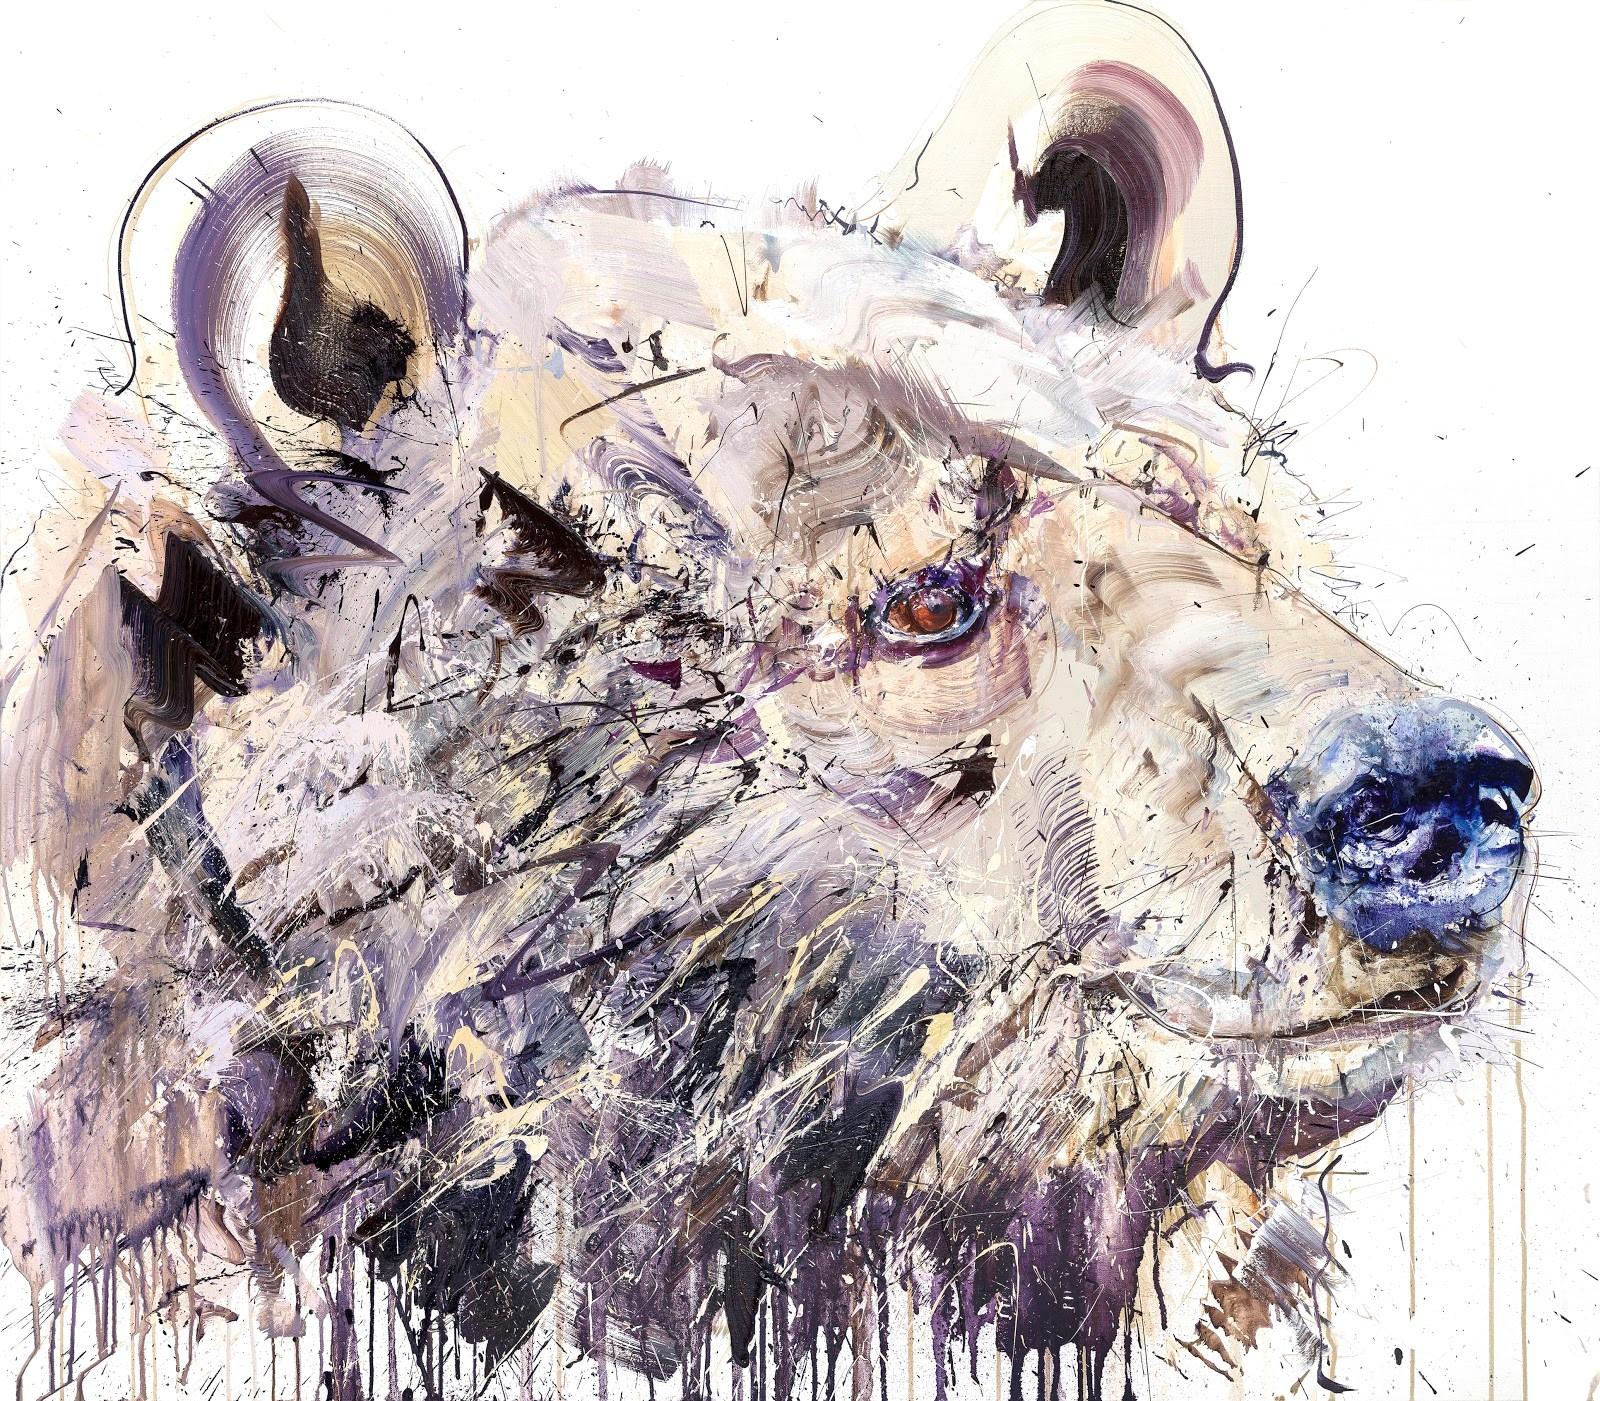 Dave White Animal Print - Young Grizzly (larger size)